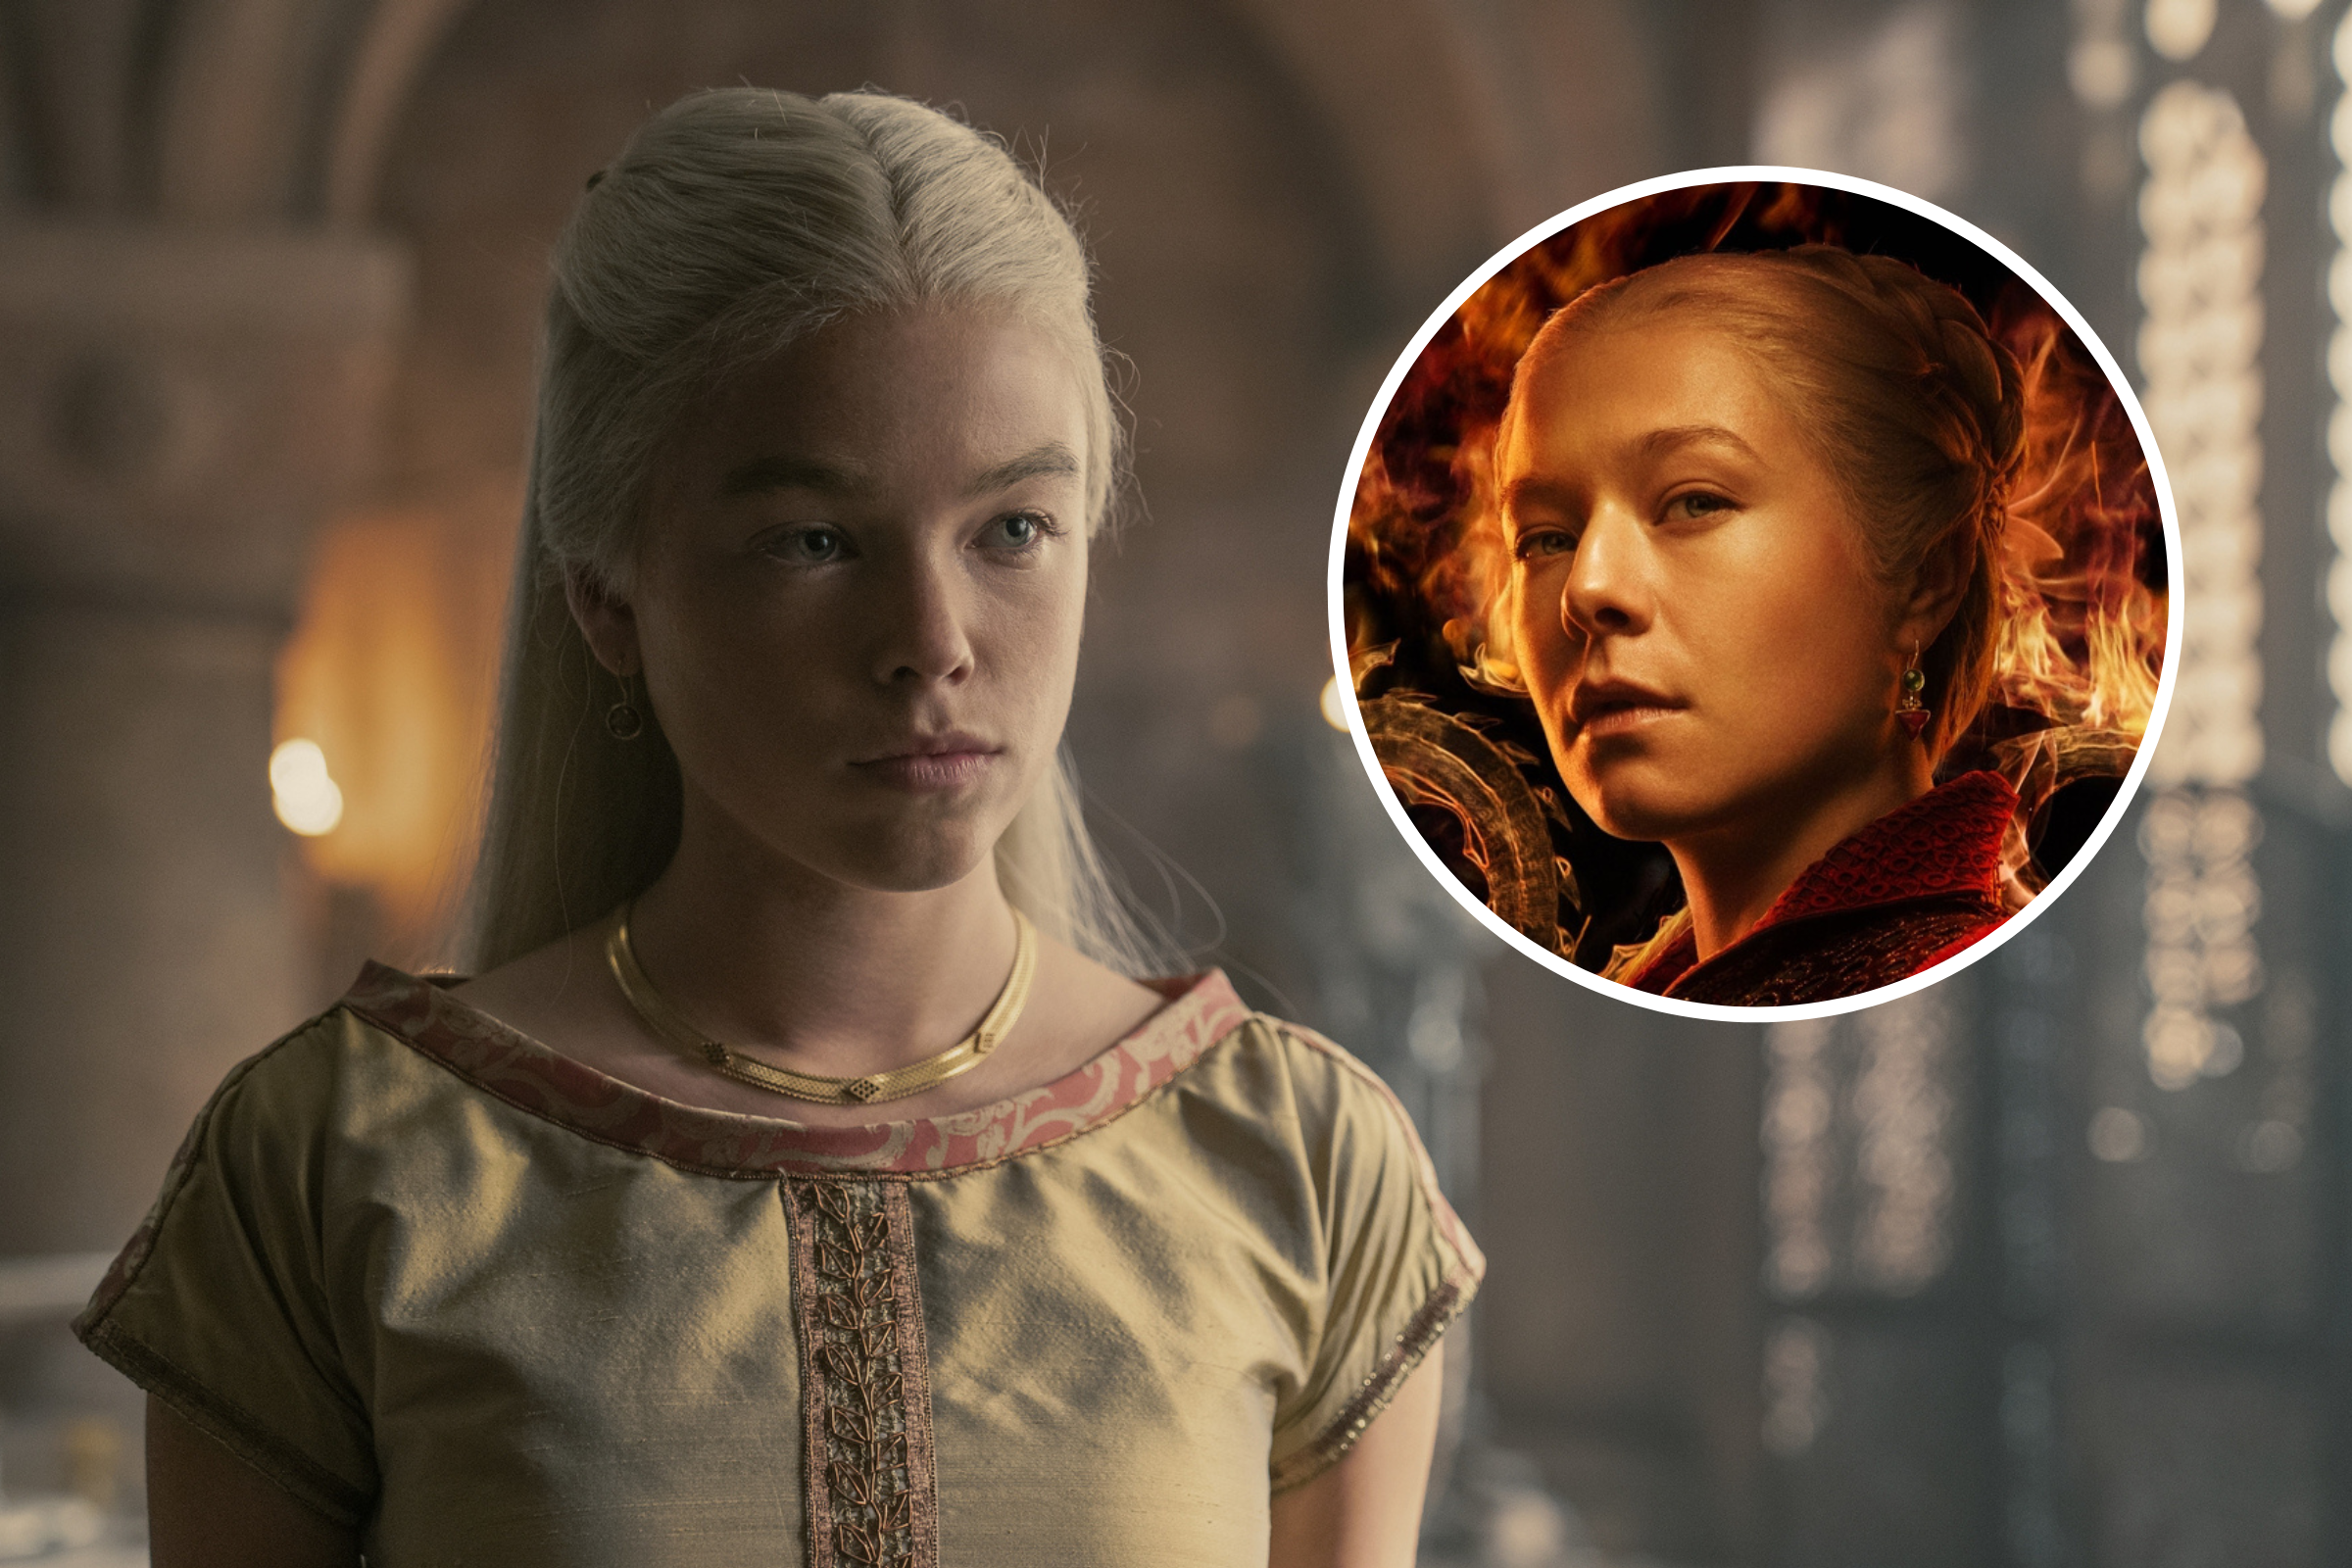 House of the Dragon: When is the new Game of Thrones set?